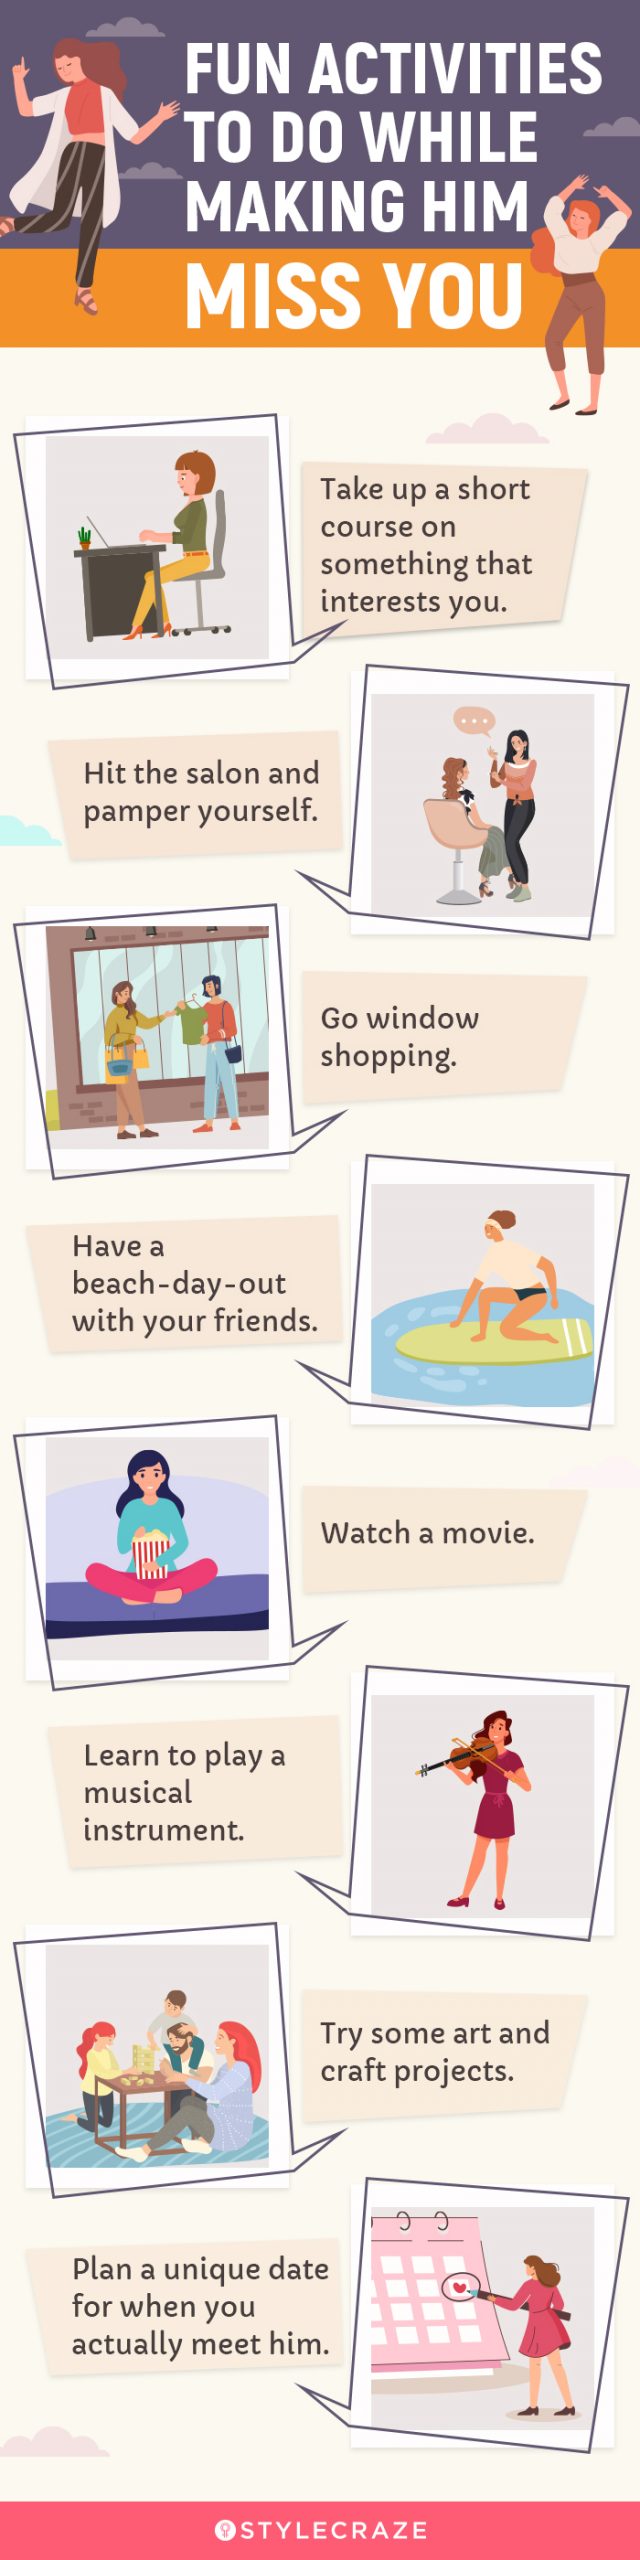 fun activities to do while making him miss you (infographic)